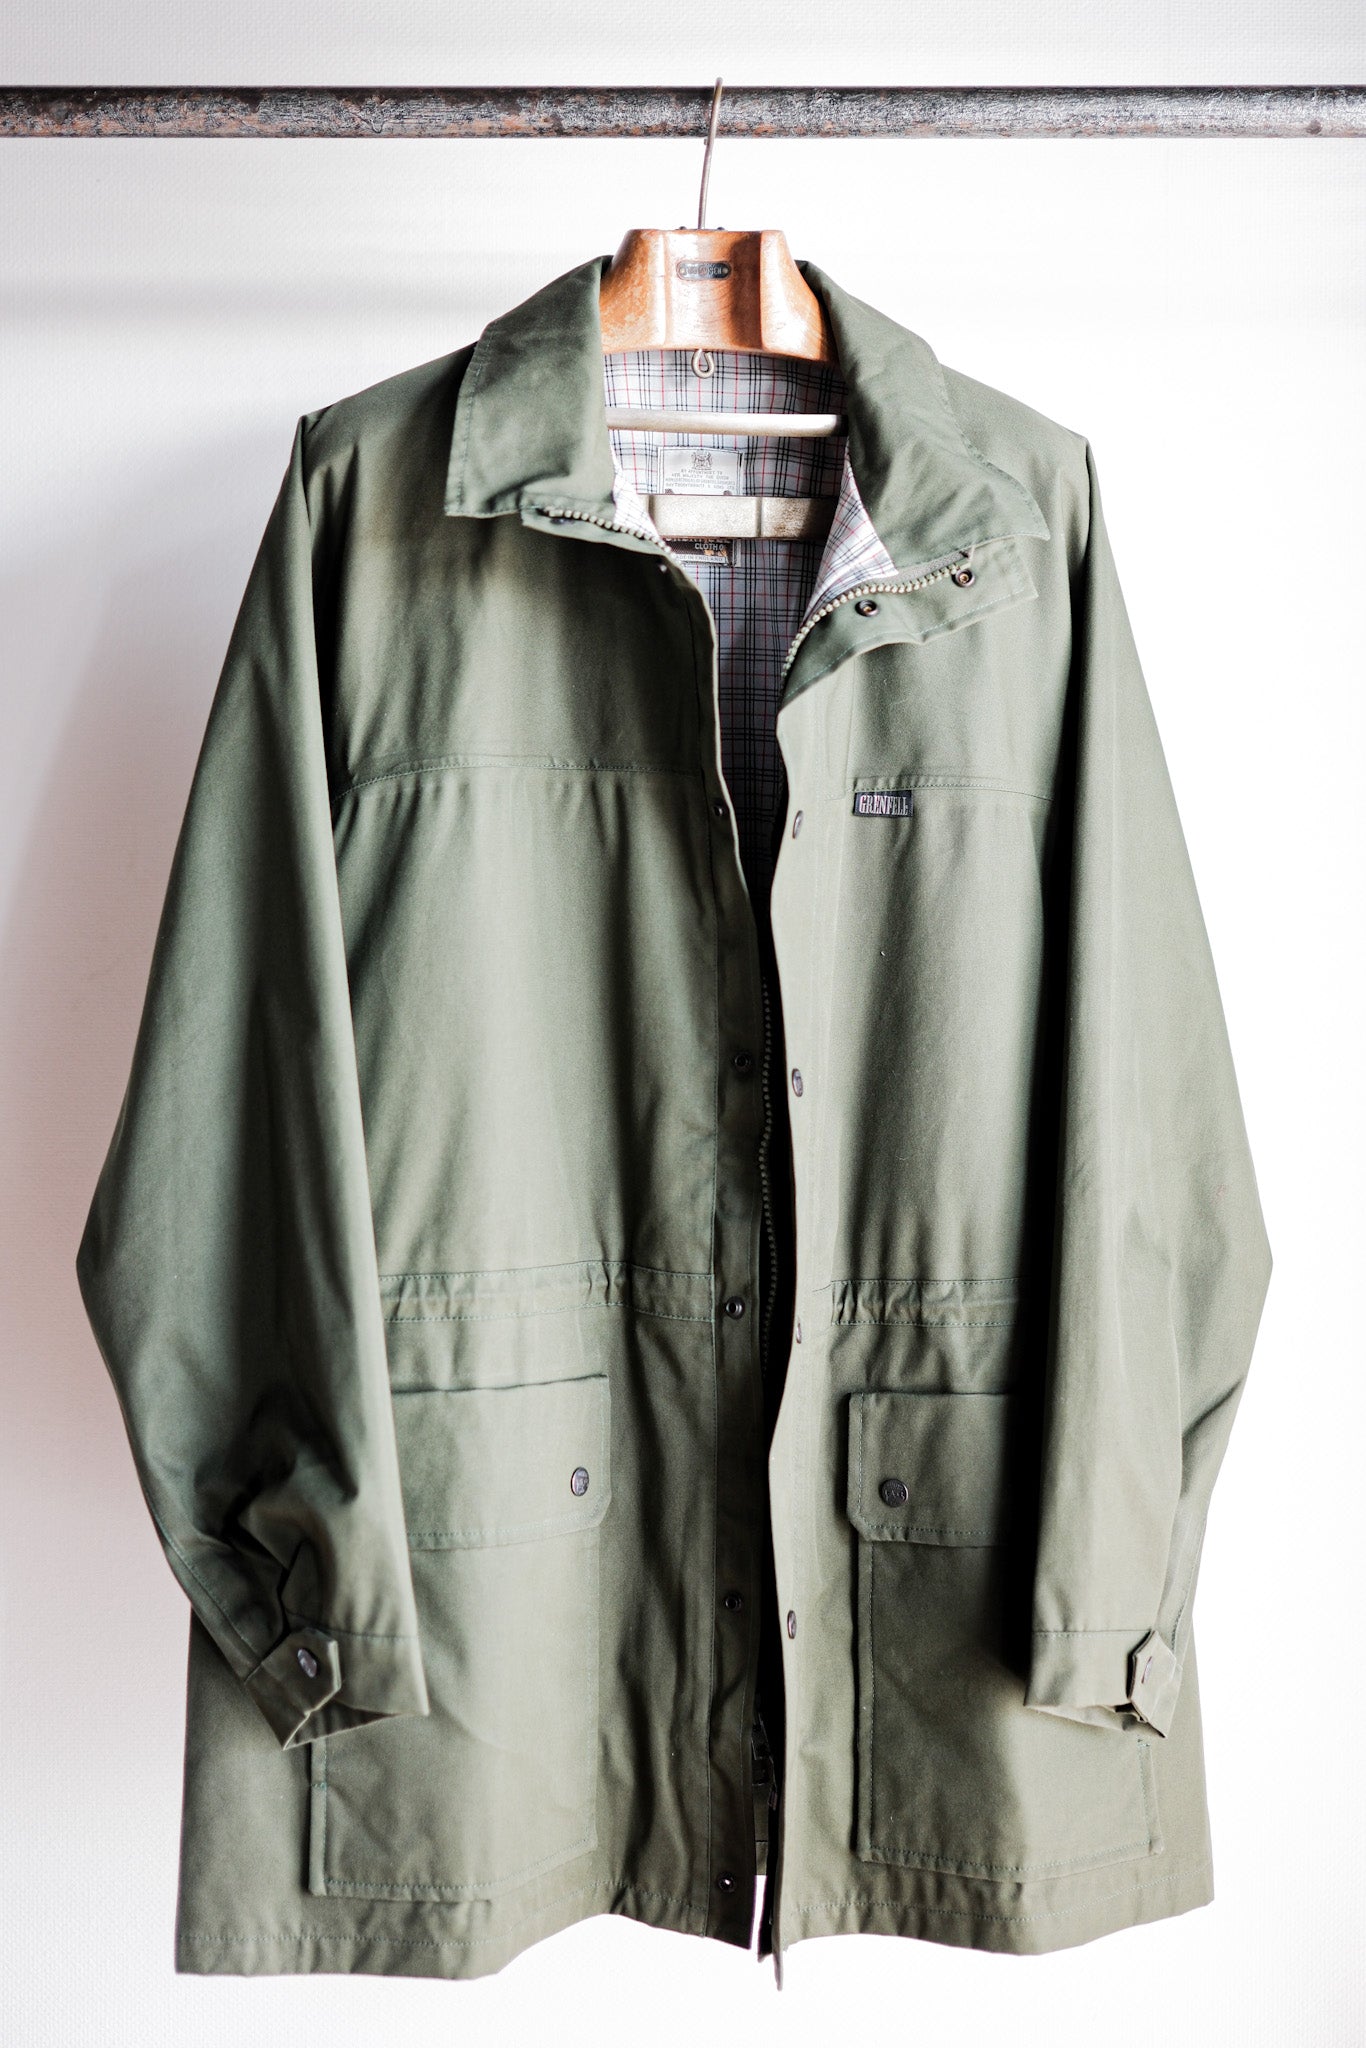 【~80’s】Vintage Grenfell Munro Jacket Size.XL “Mountain Tag”